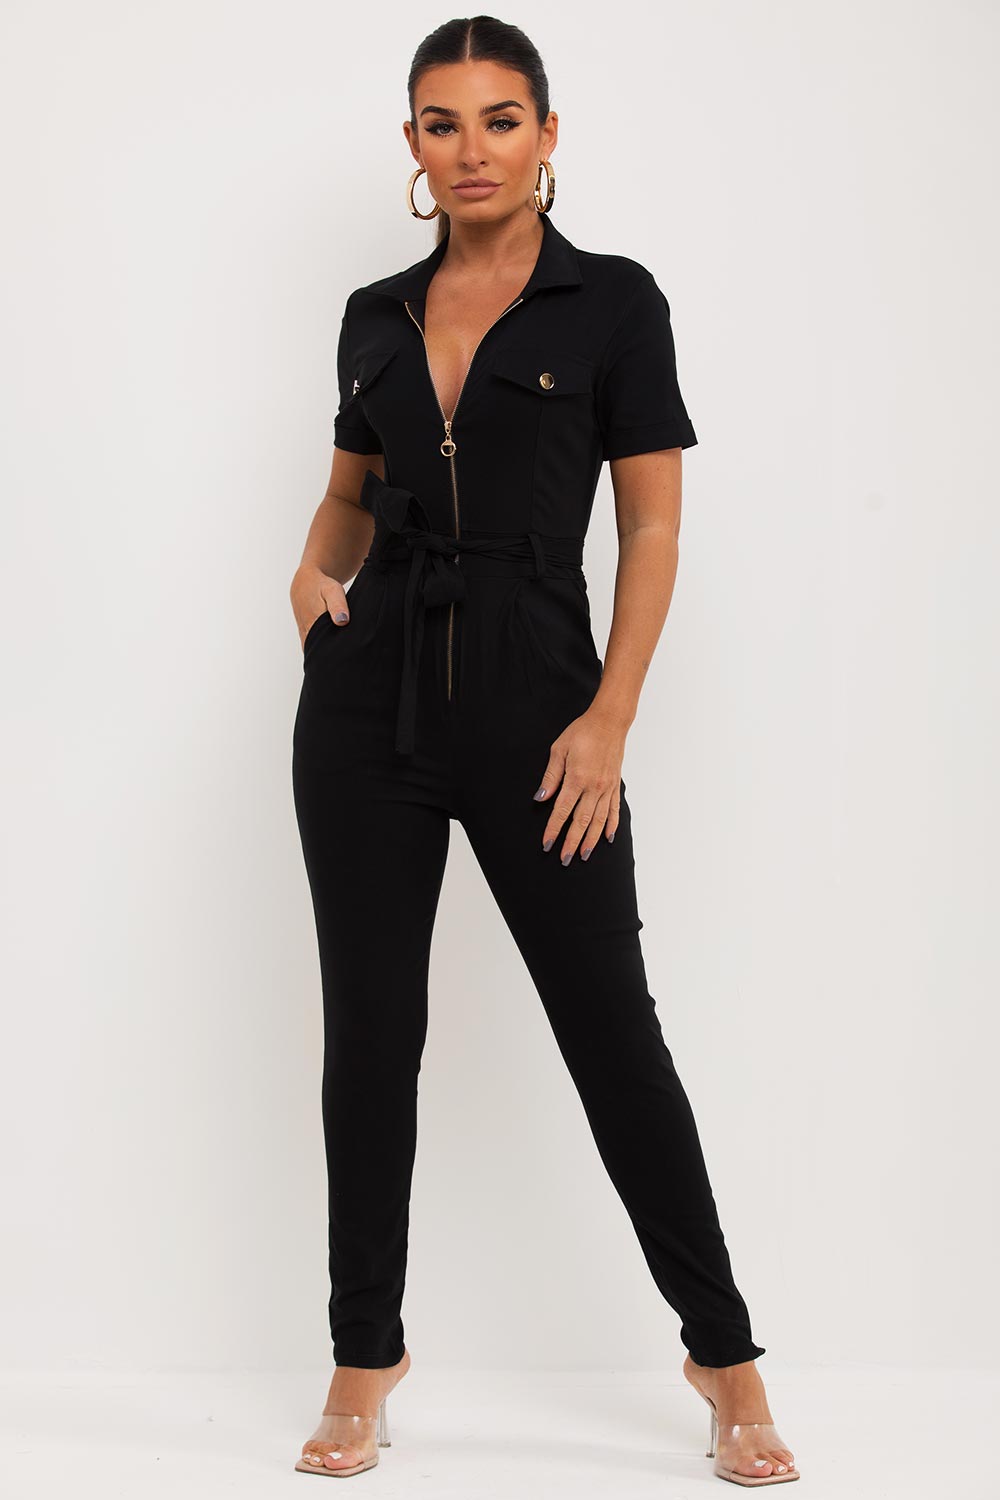 Women's Jumpsuit With Zip Front And Utility Pockets Black – Styledup.co.uk